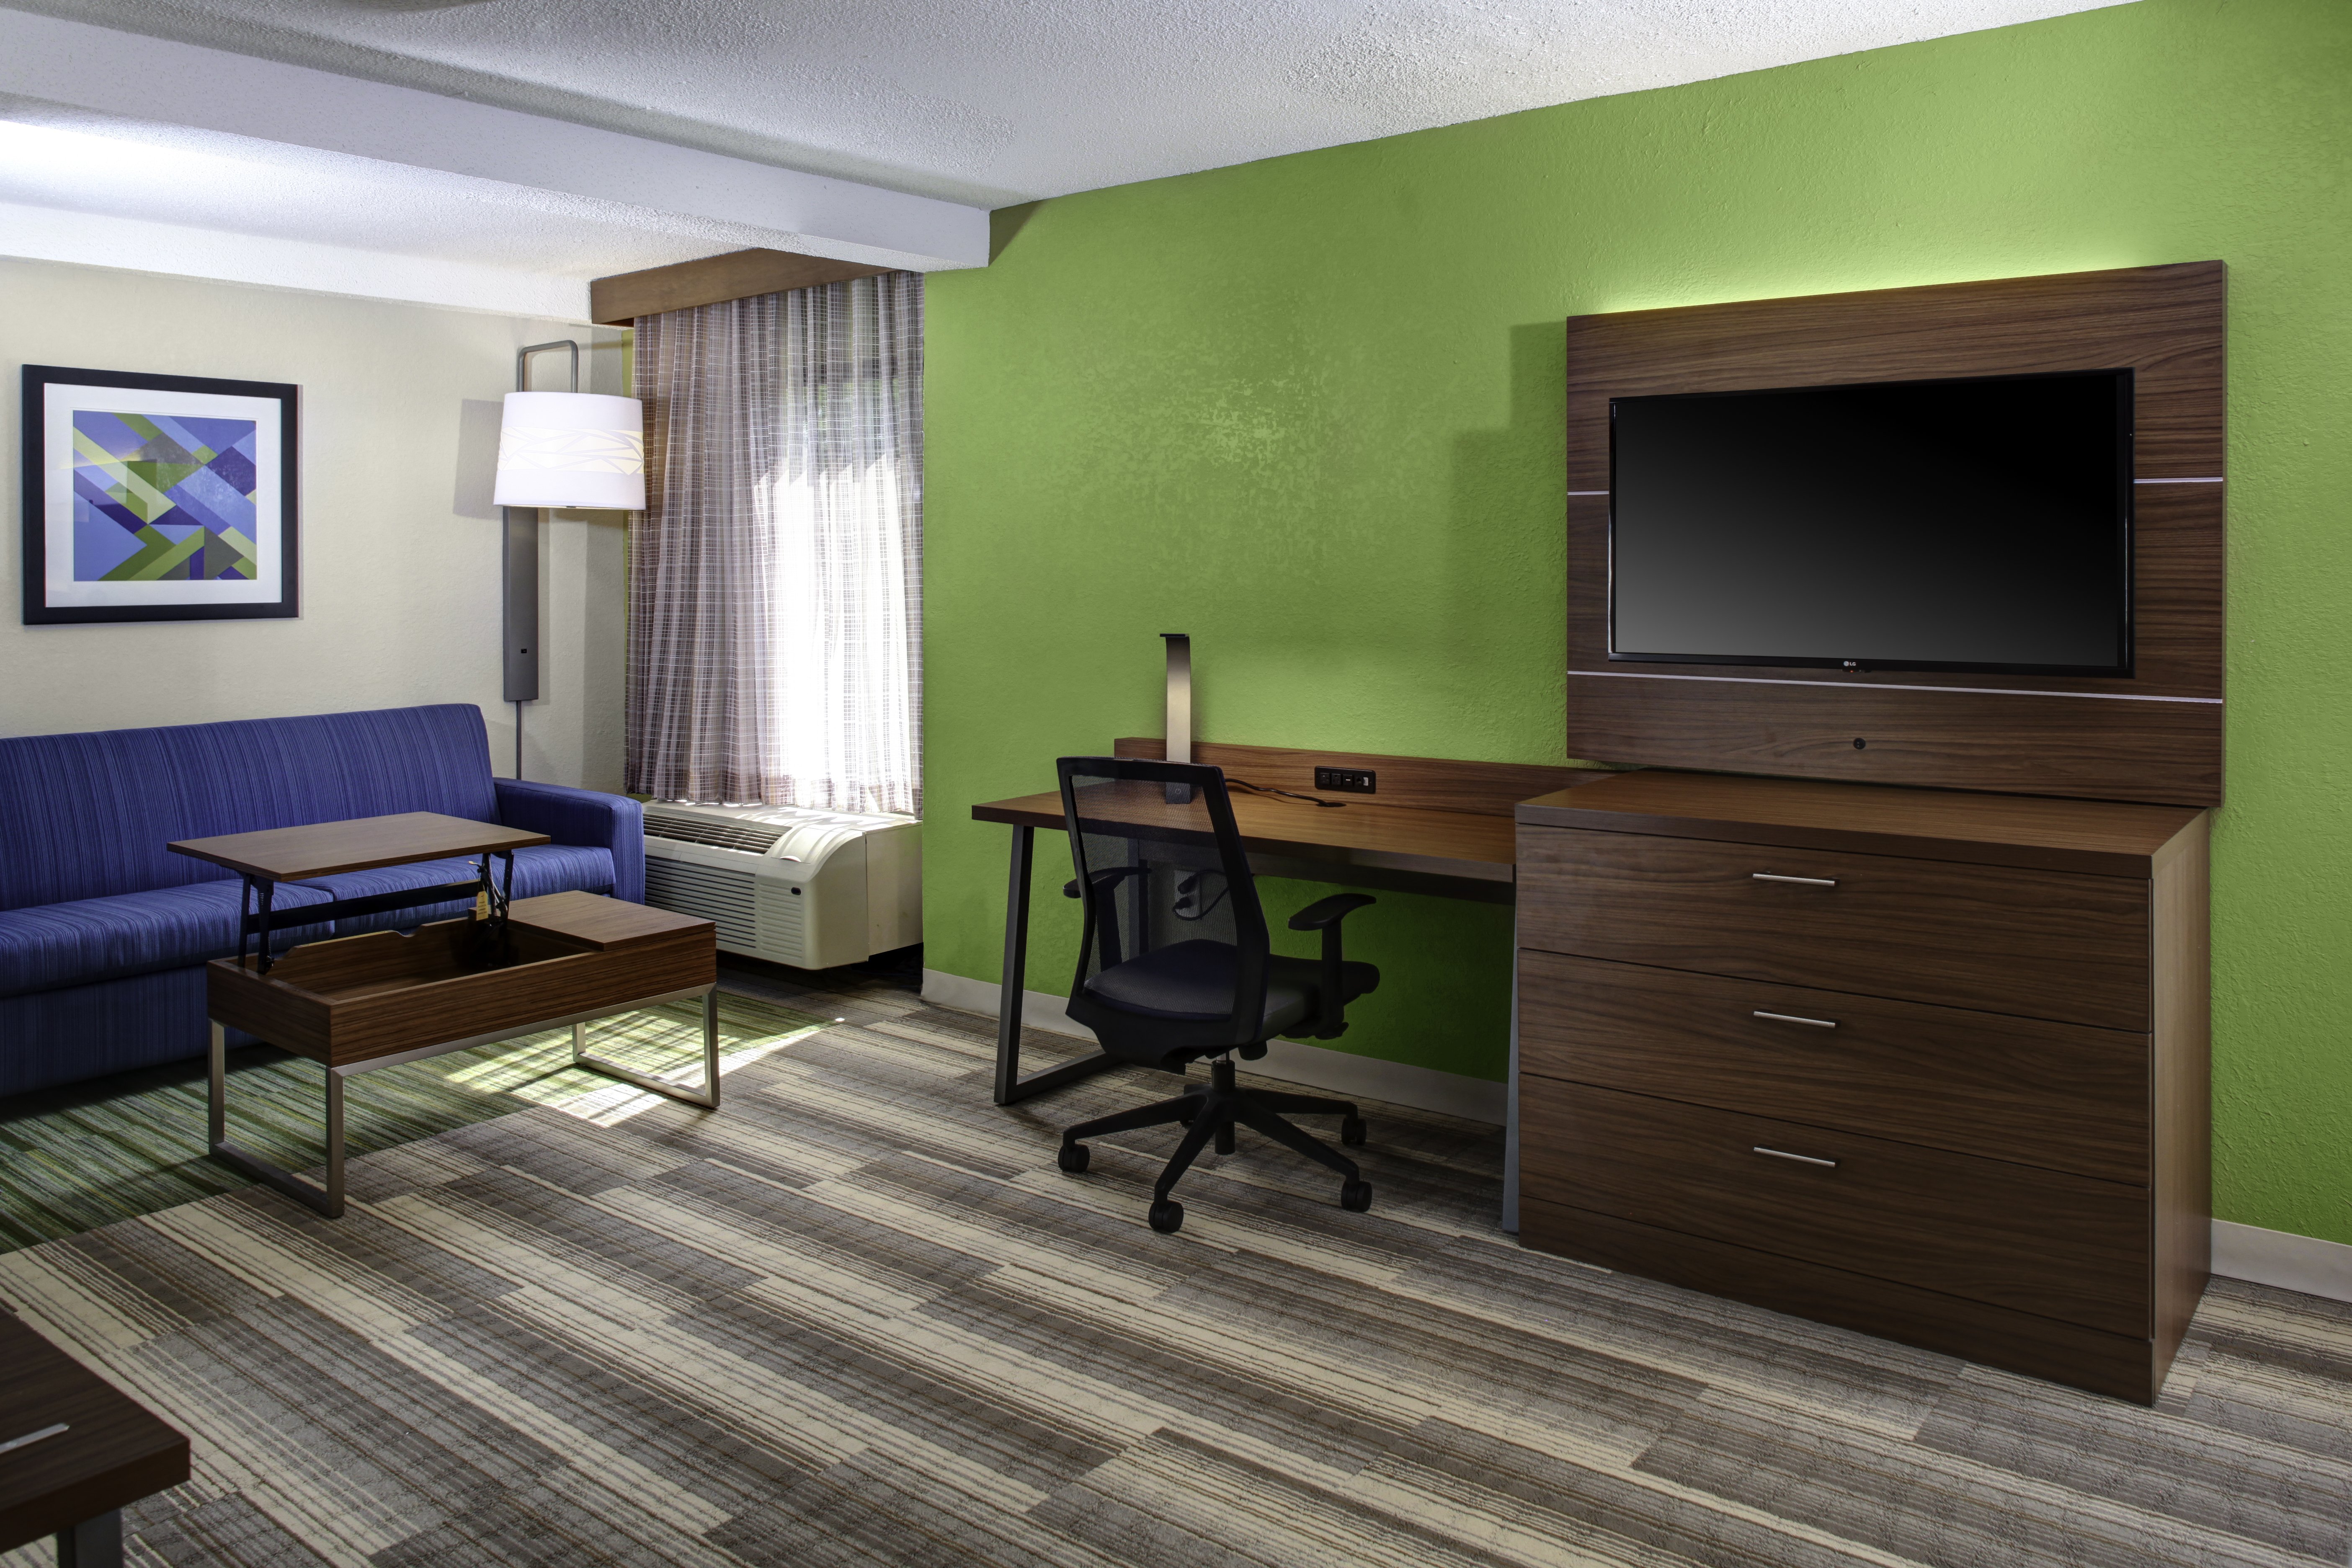 Be The Readiest for Your Work Week In Our Spacious Suite!!